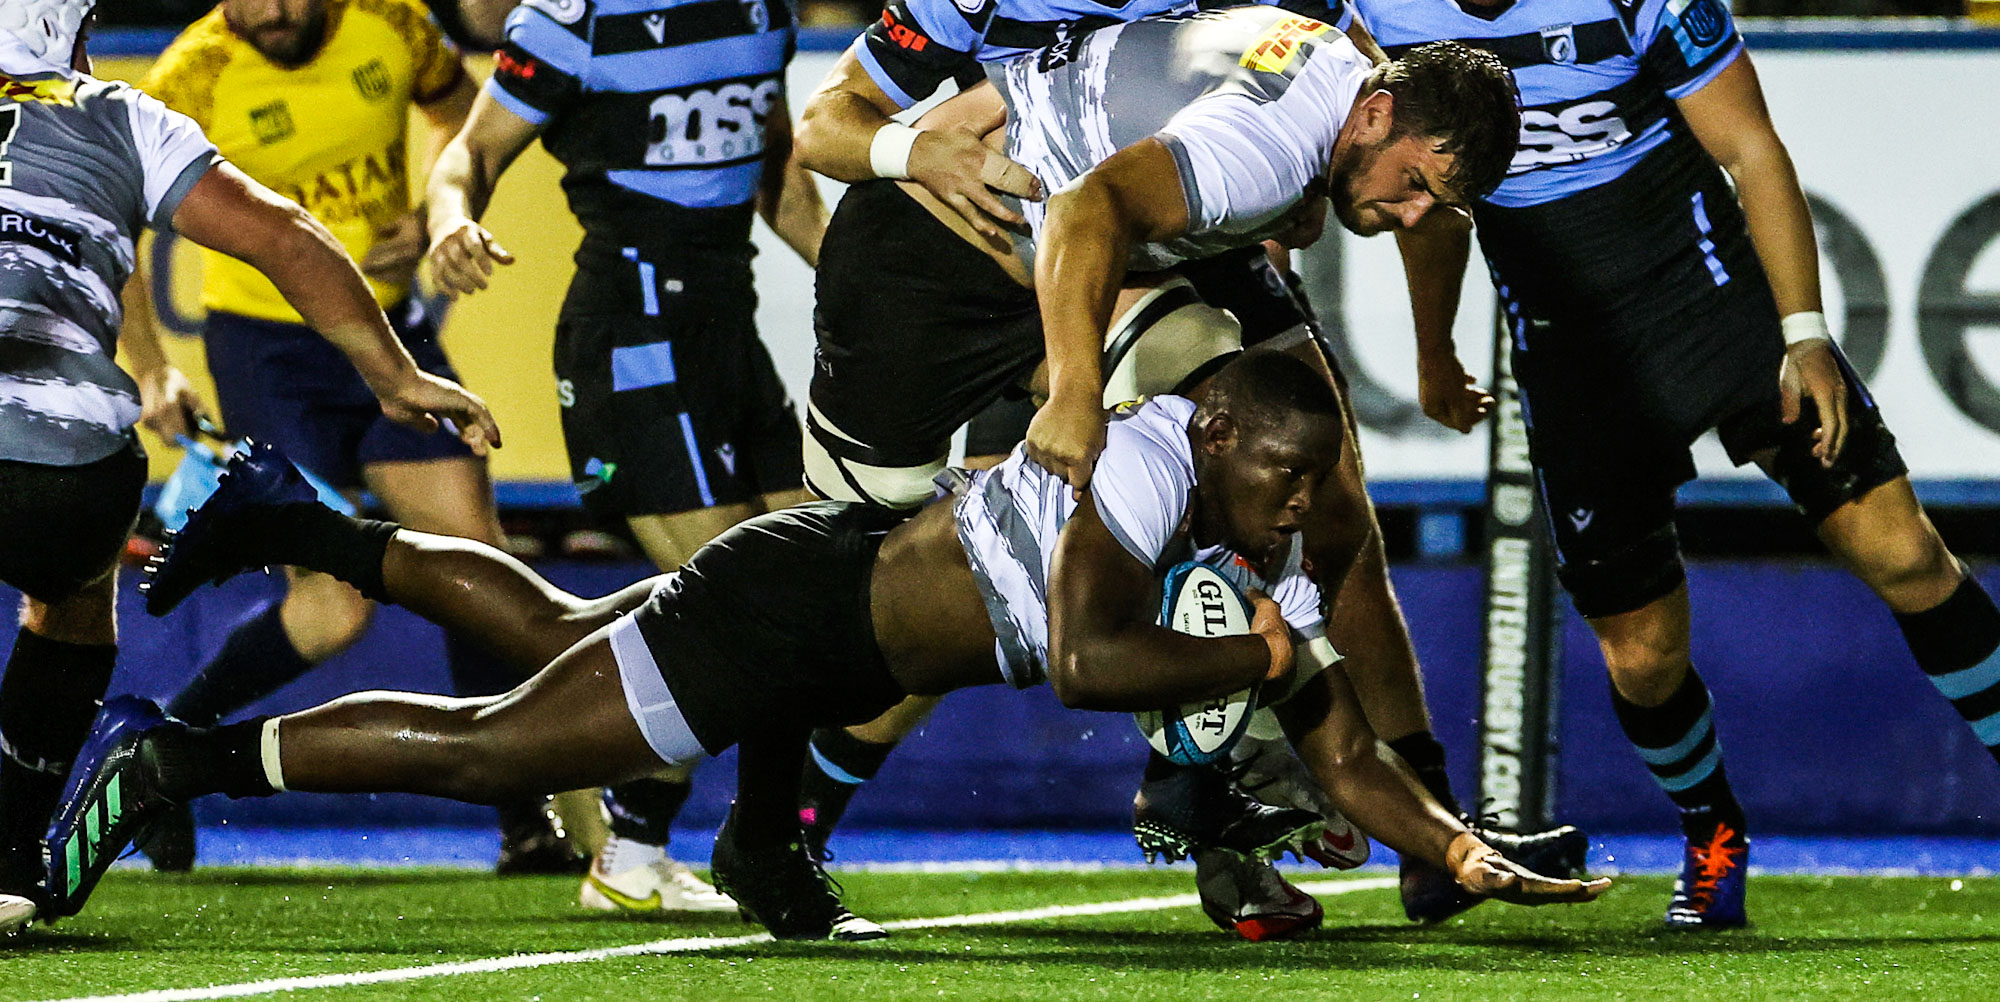 Nama Xaba scored two tries for the DHL Stormers.